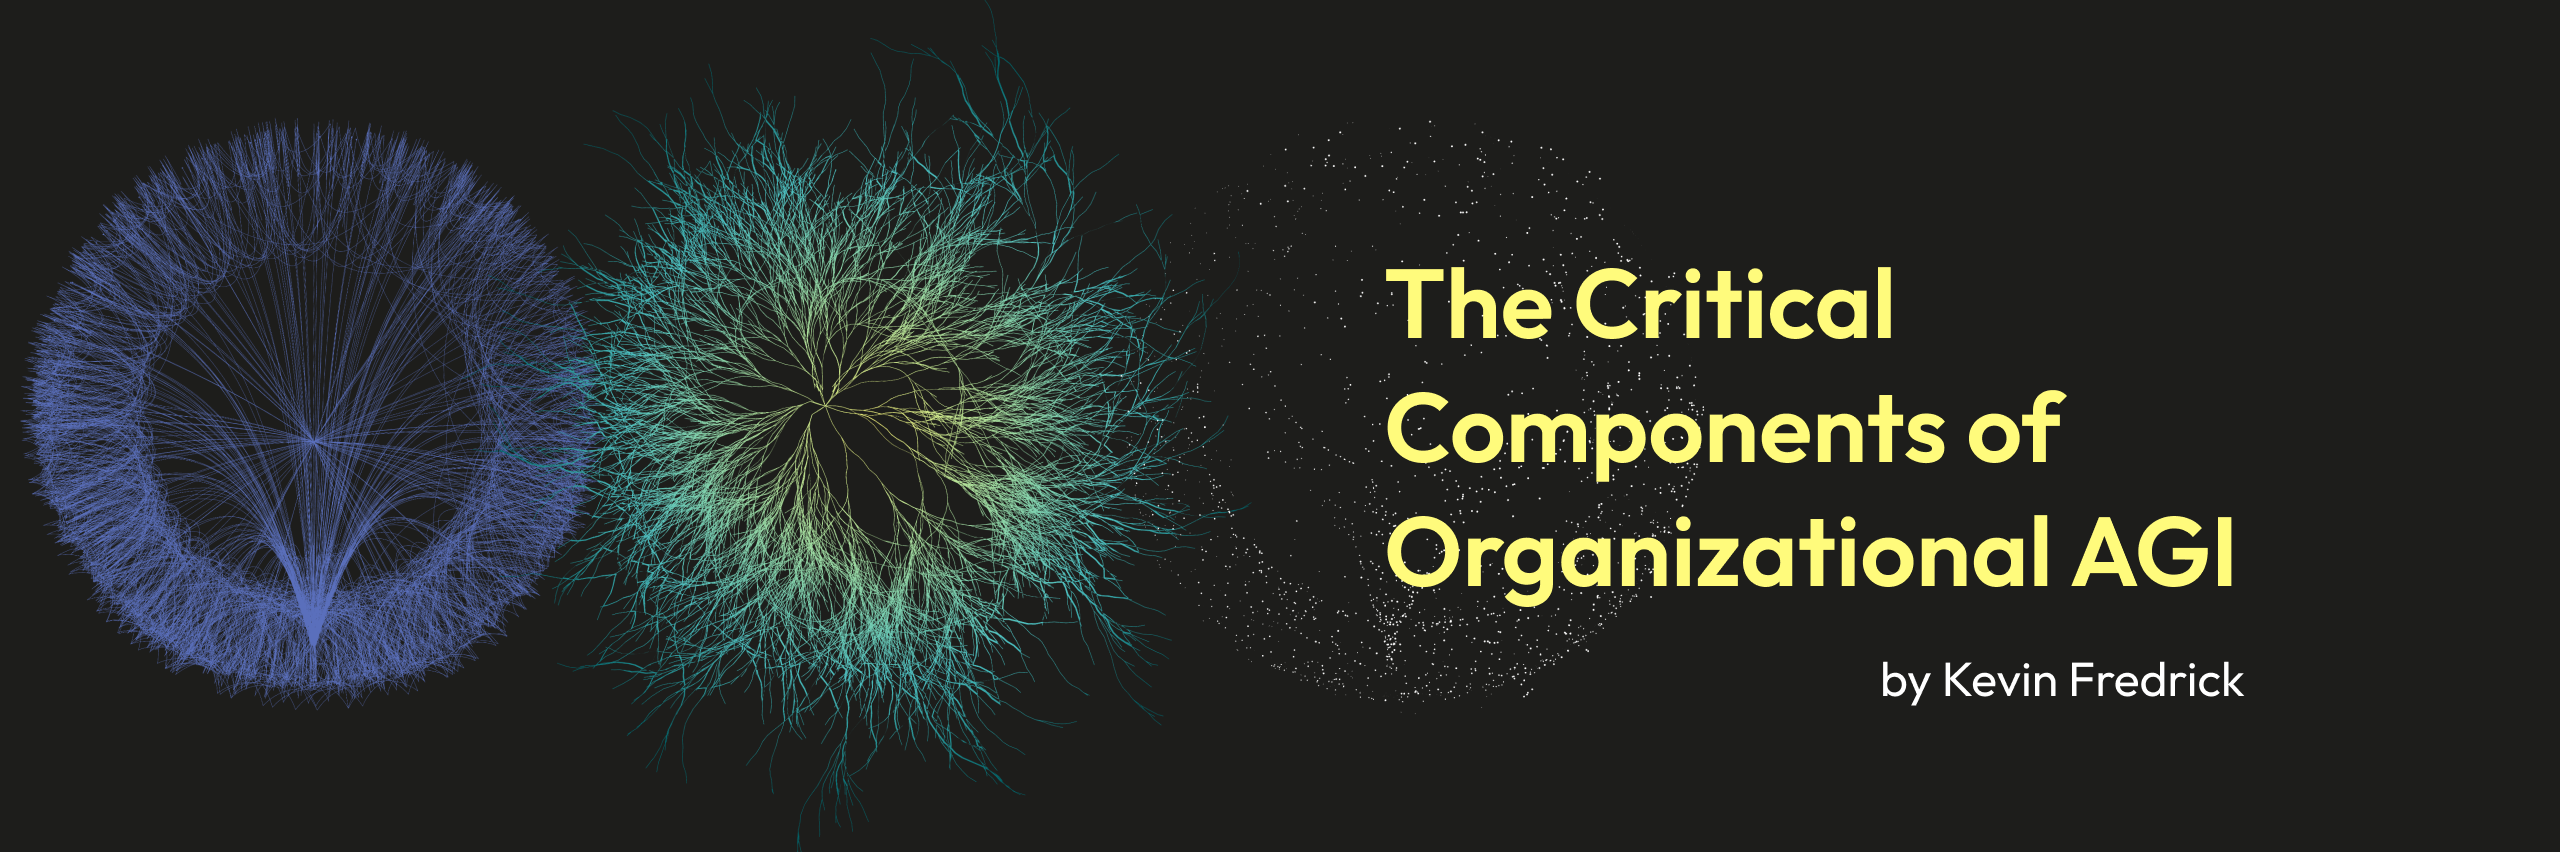 The Critical Components of Organizational AGI